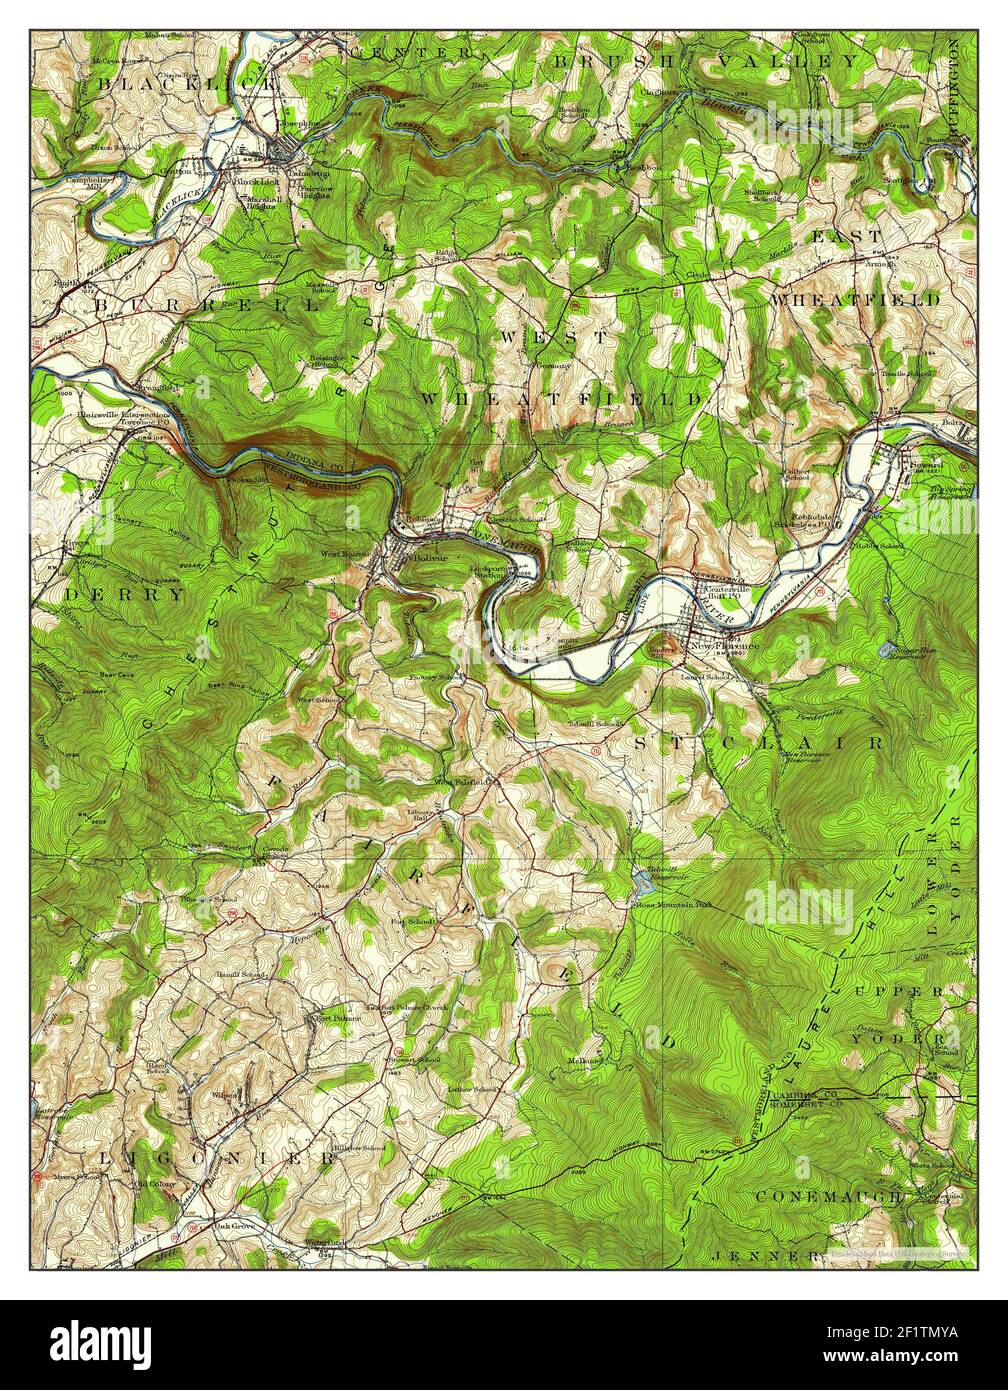 New Florence, Pennsylvania, map 1920, 1:62500, United States of America by Timeless Maps, data U.S. Geological Survey Stock Photo